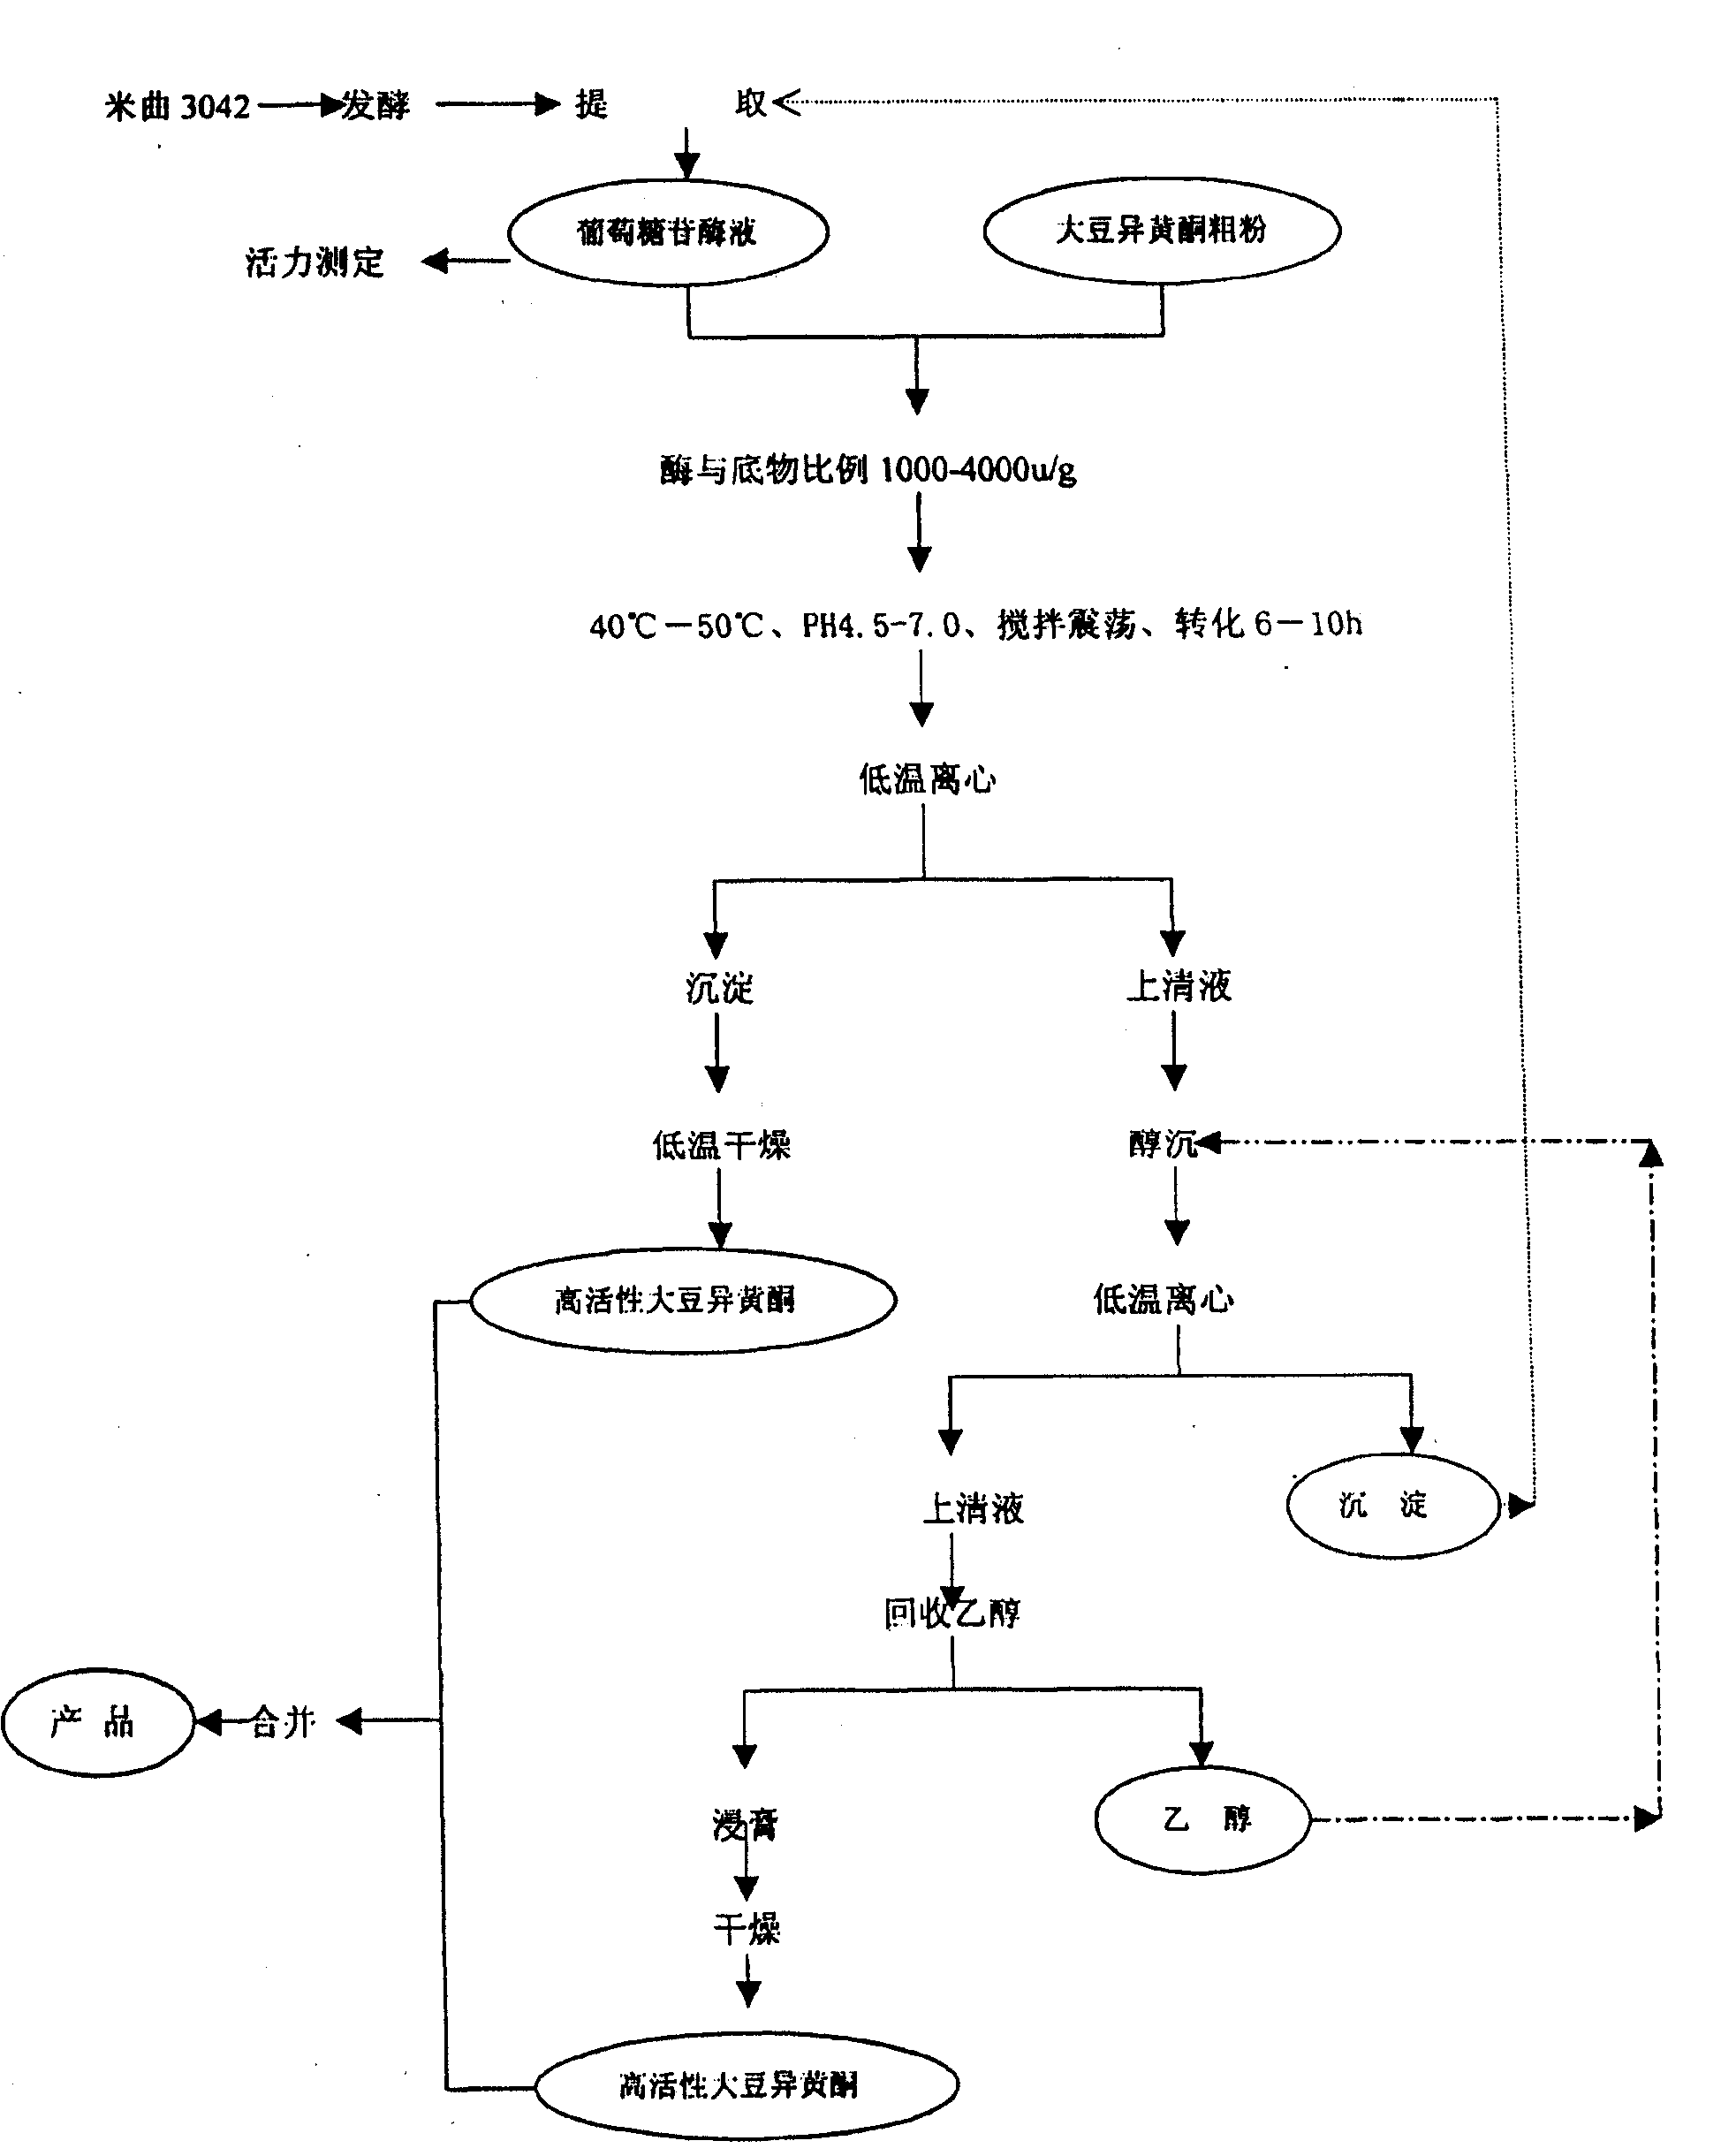 Process for preparing soybean isoflavone aglycon by microorganism enzyme method